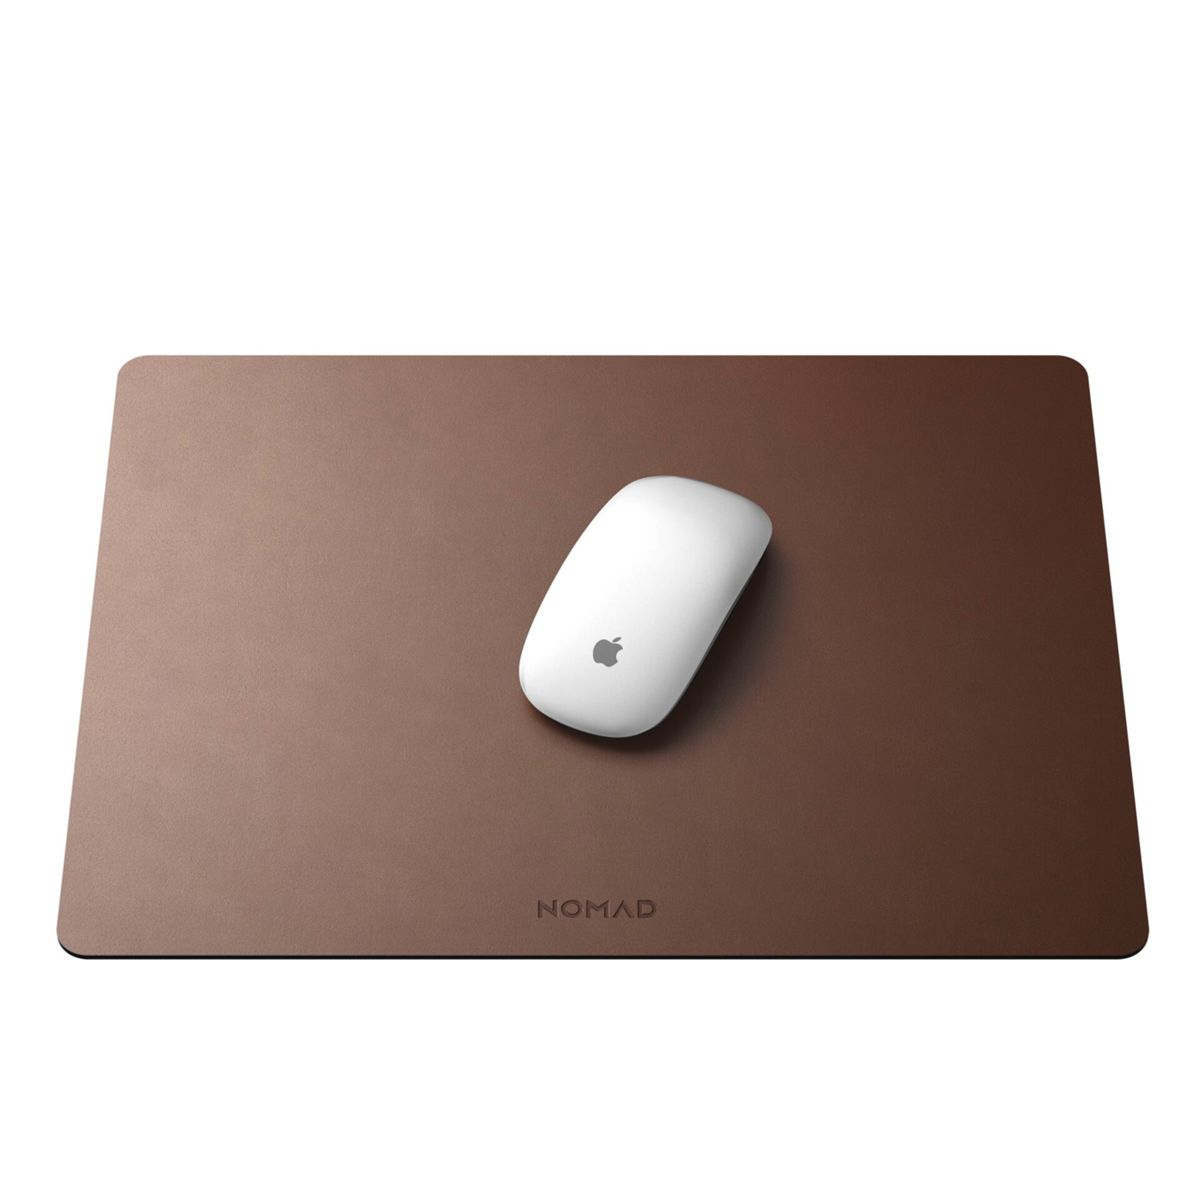 NOMAD Mousepad 16-Inch, Brown Leather Rustic Mauspad